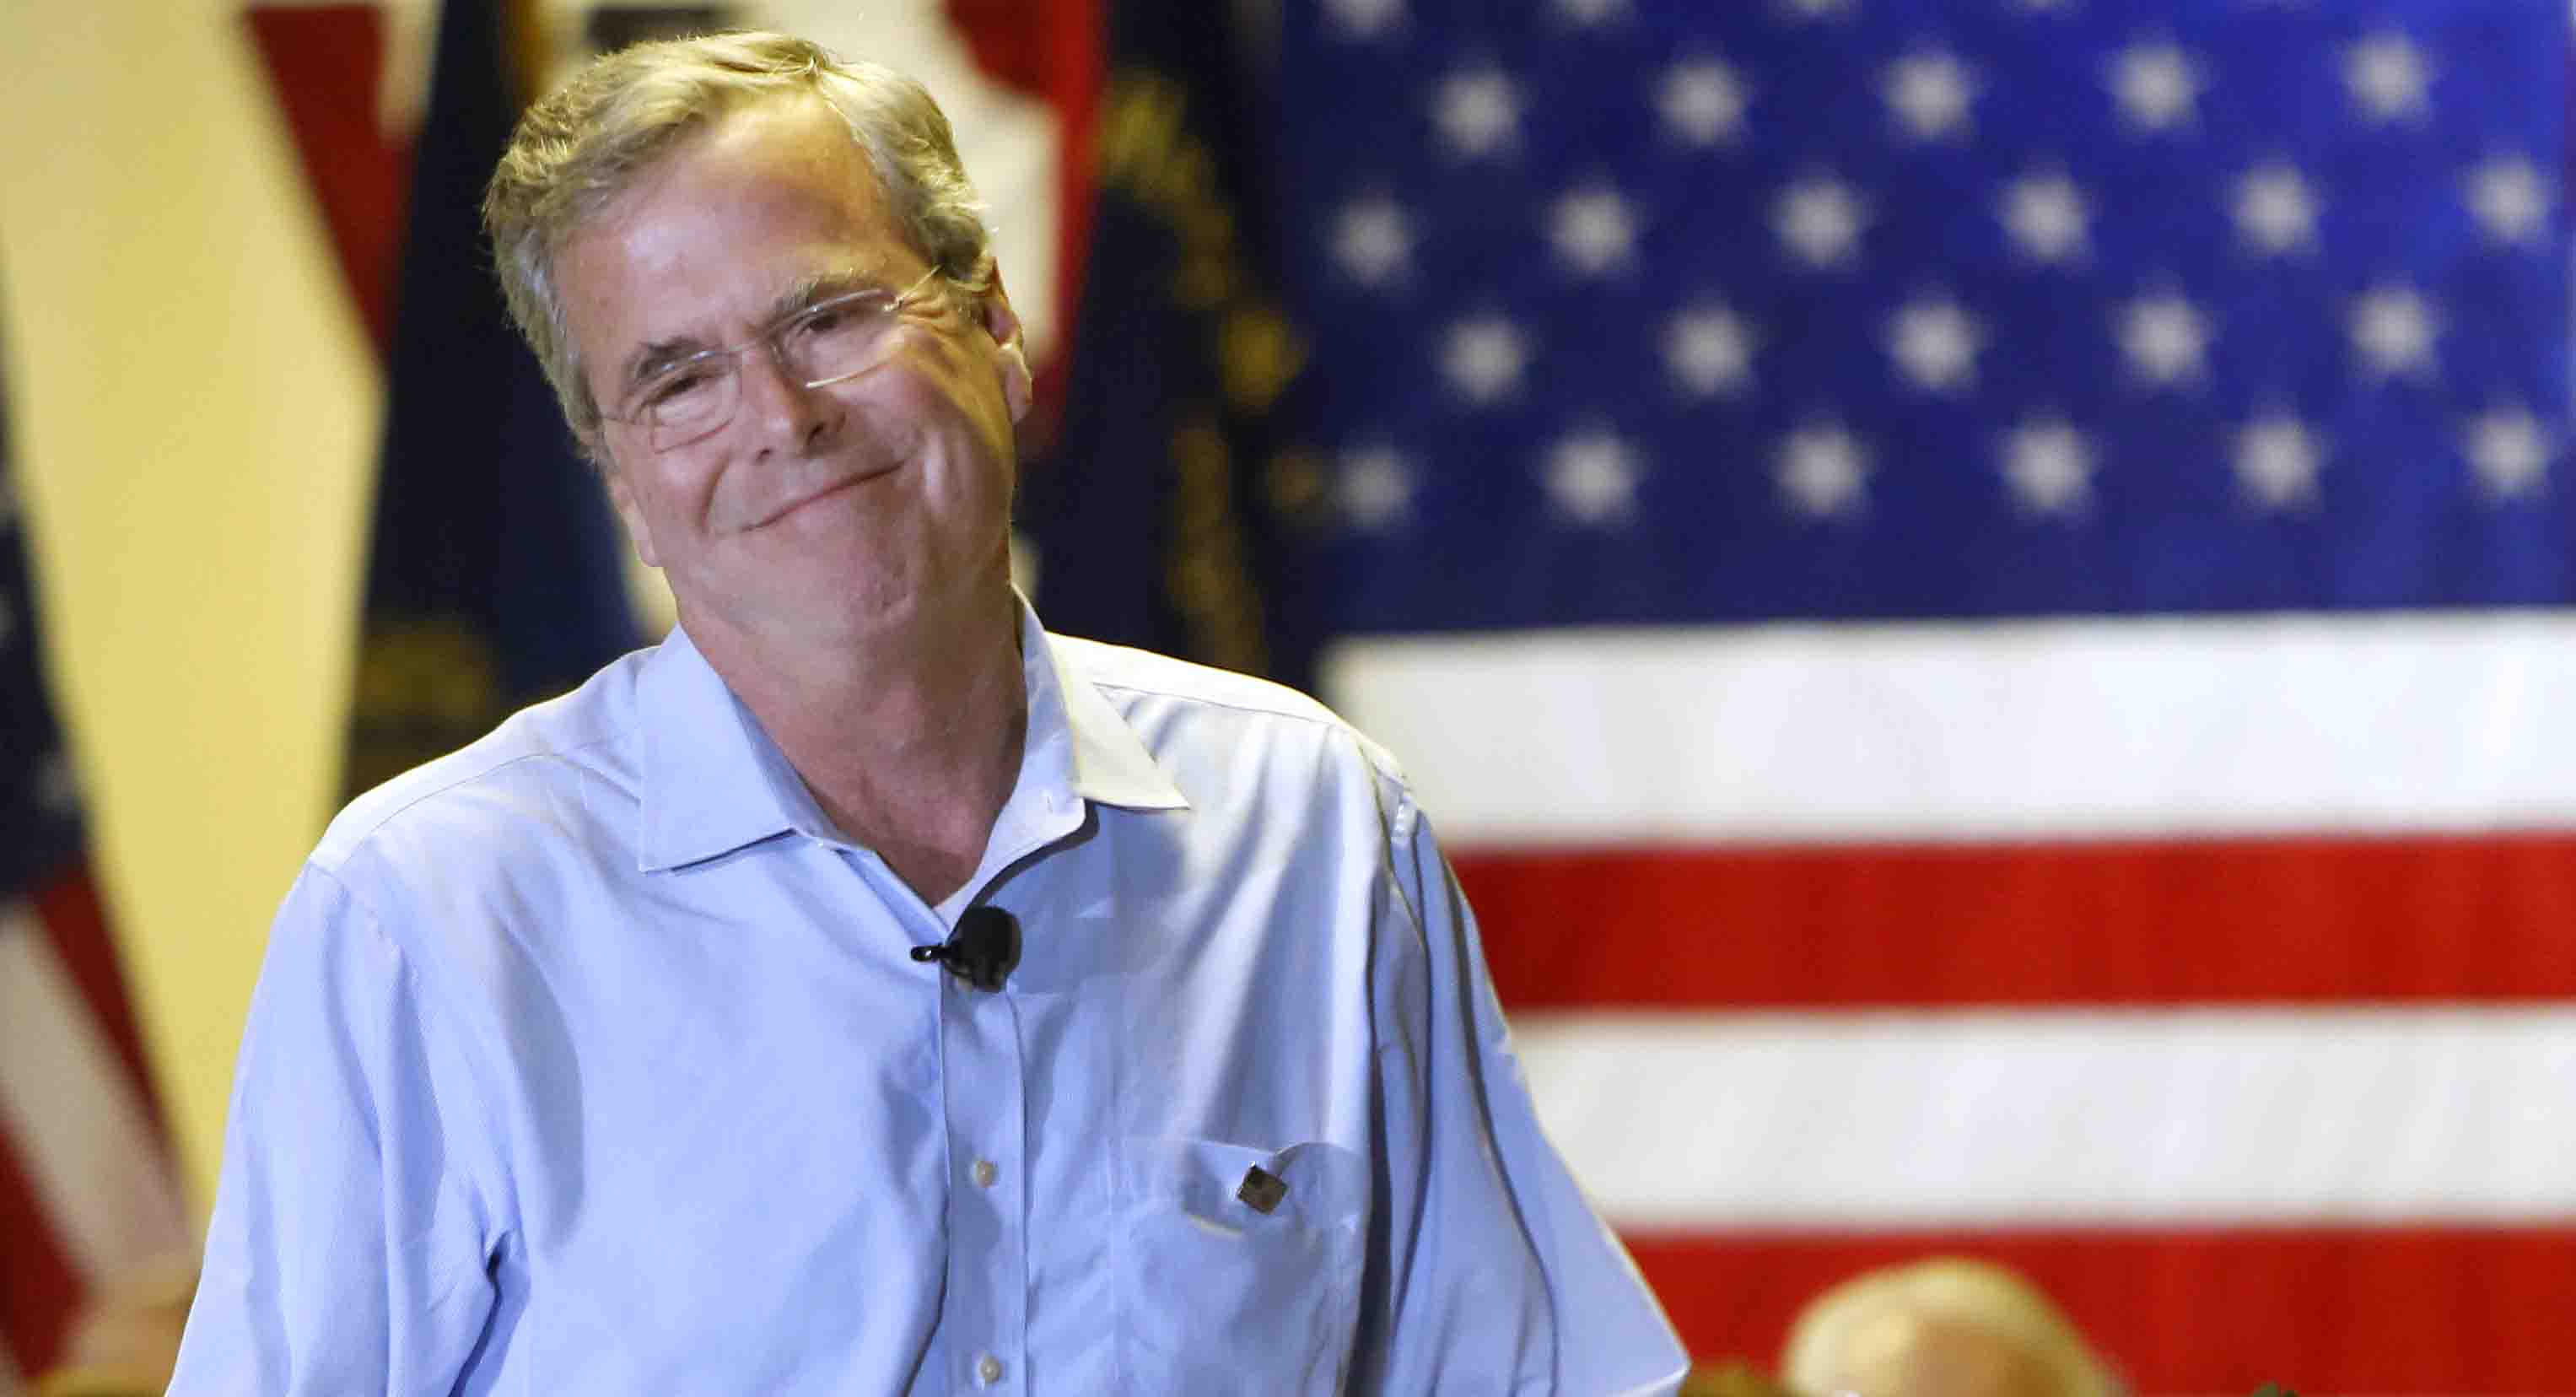 What Next for Jeb!?